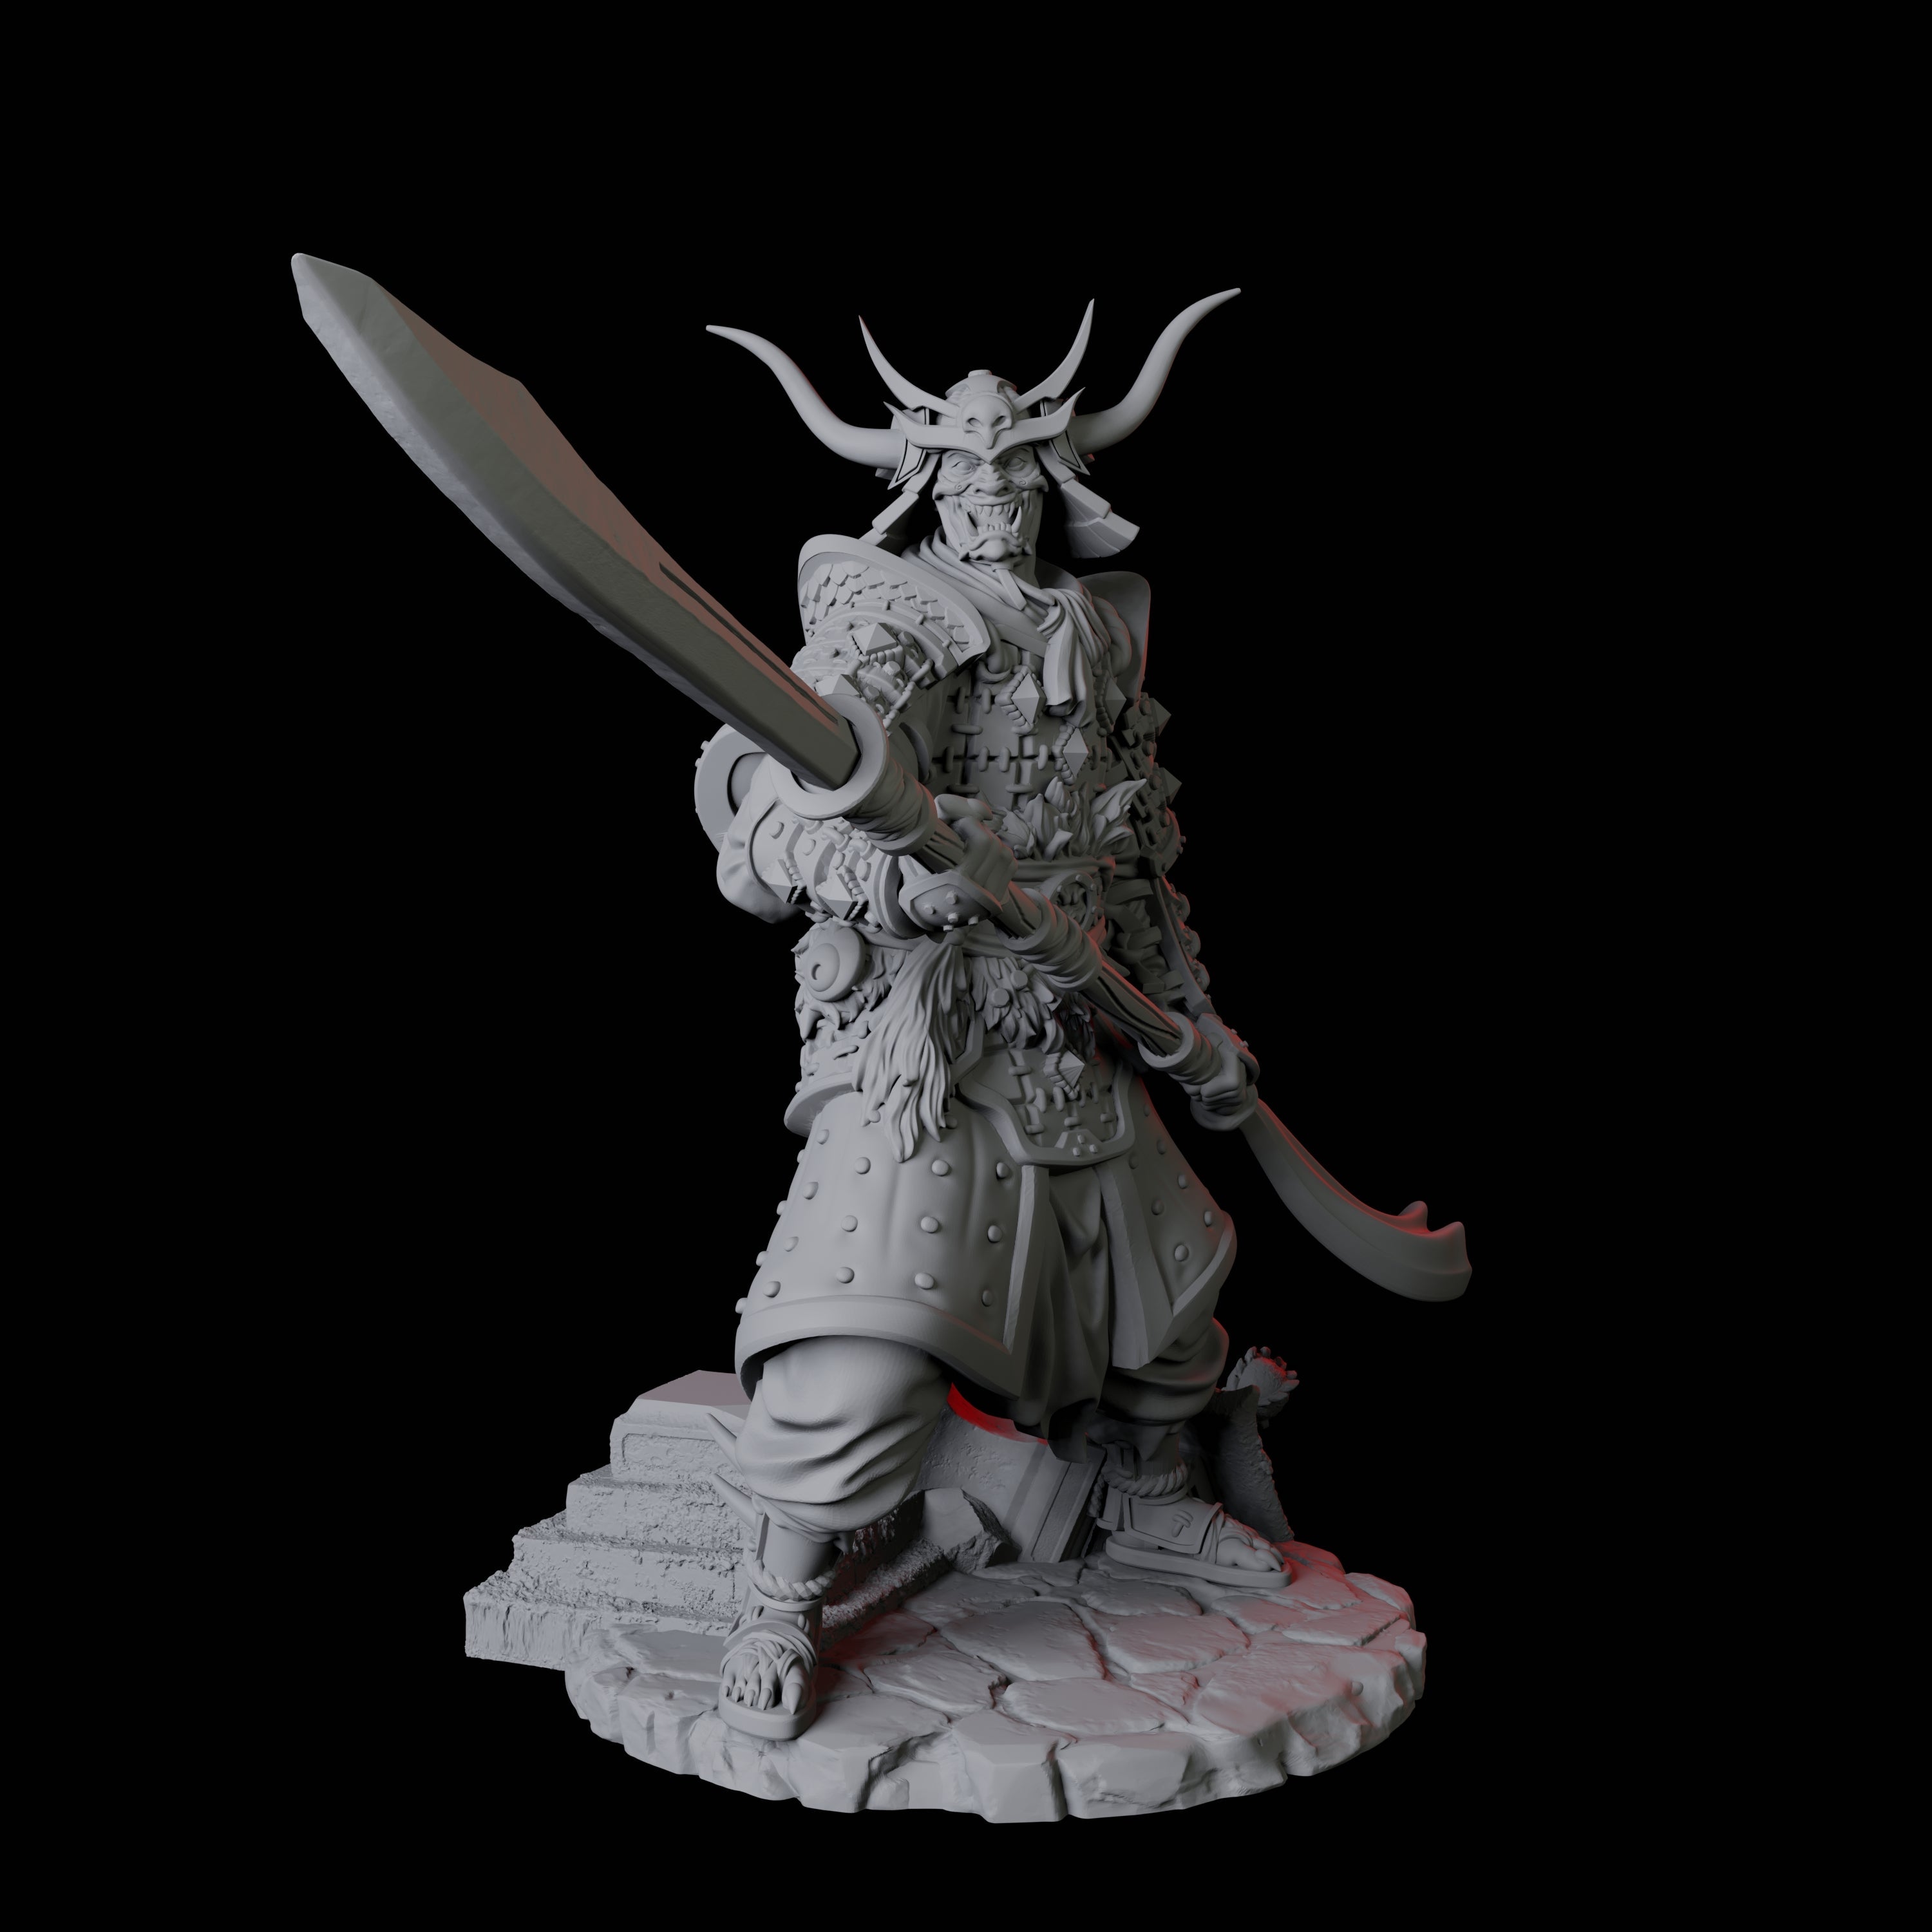 Four Oni Death Samurai Miniature for Dungeons and Dragons, Pathfinder or other TTRPGs